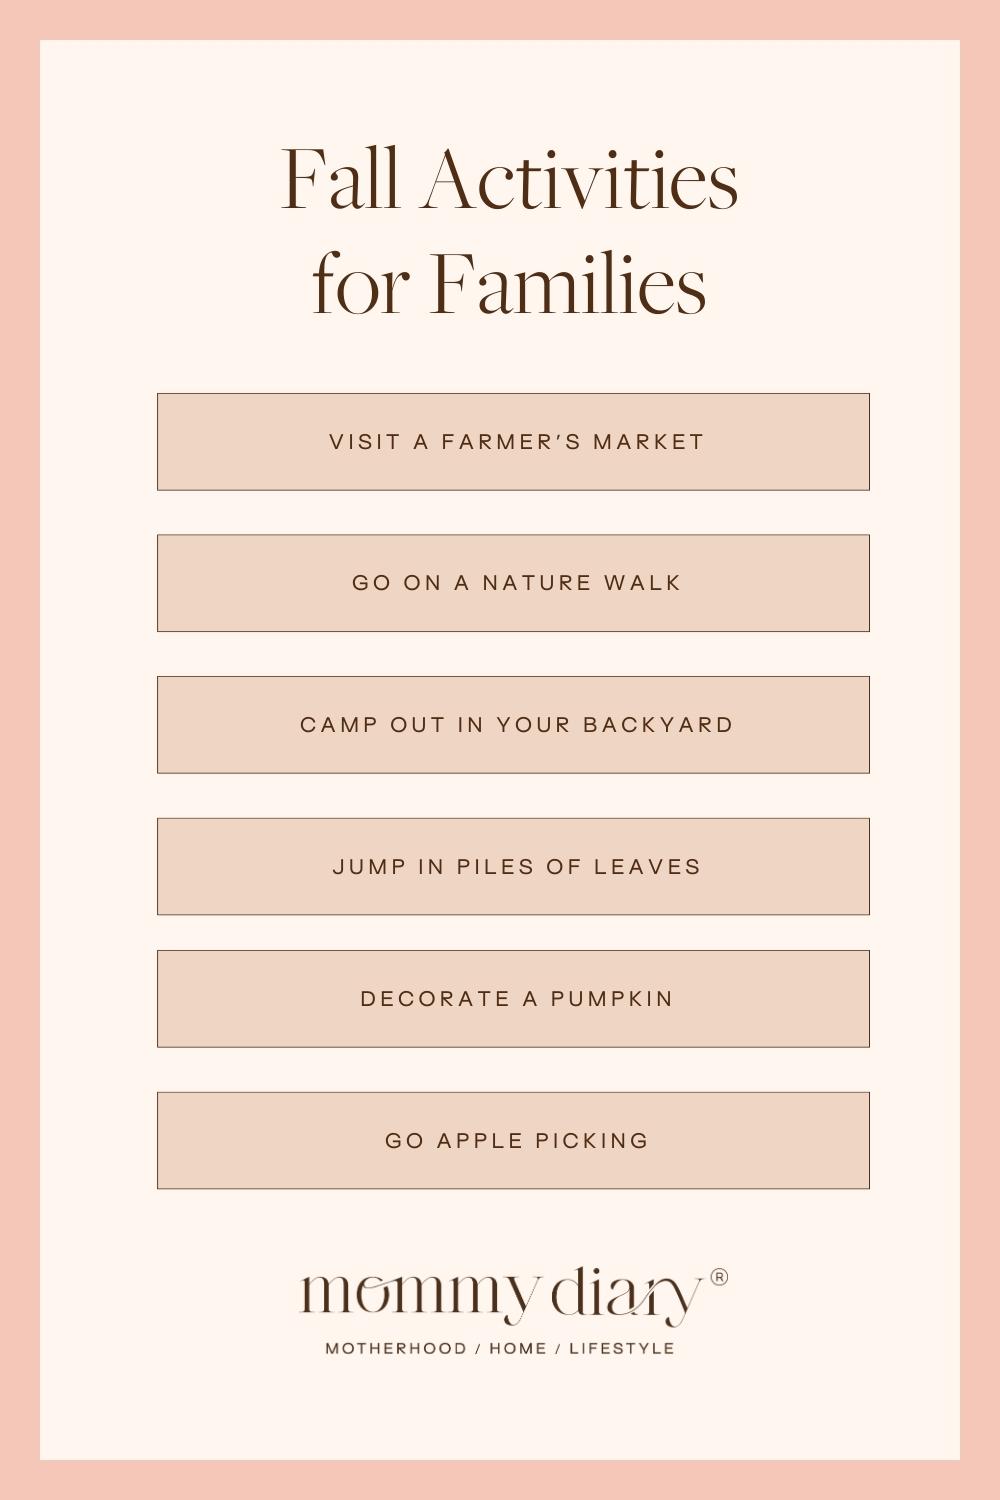 Fall Activities for Families List 1